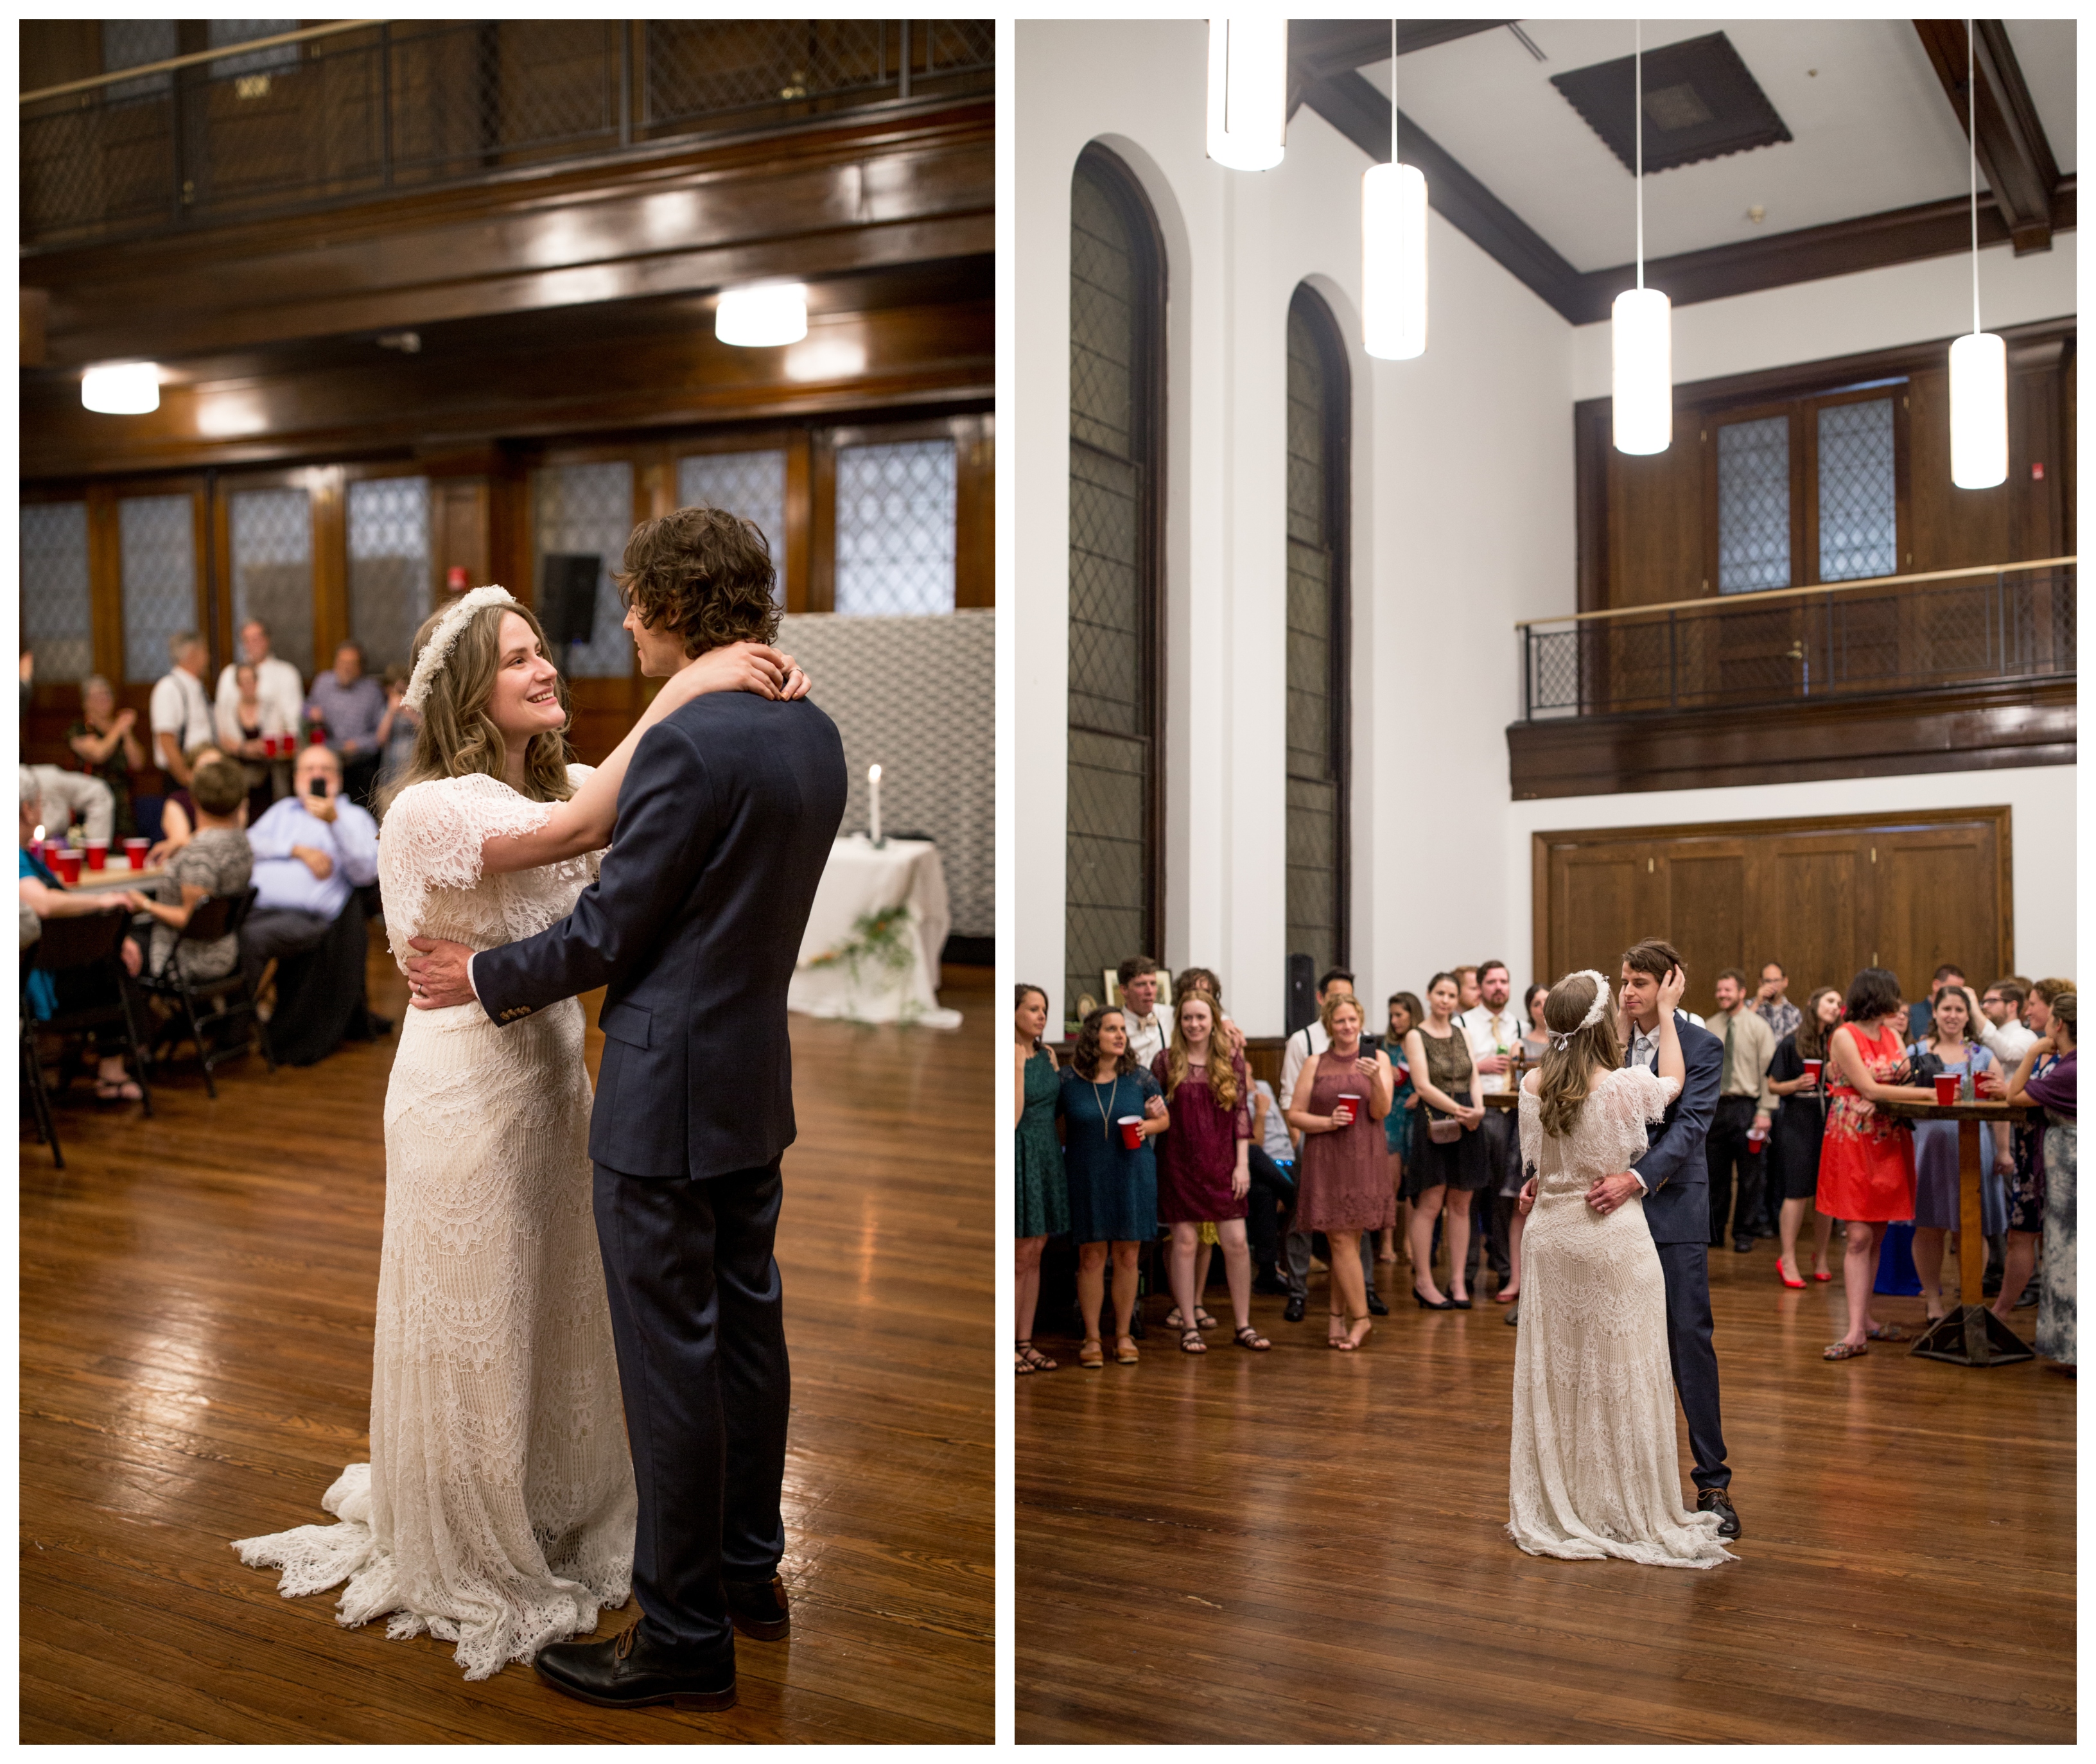 bride and groom share first dance at liberti church wedding reception